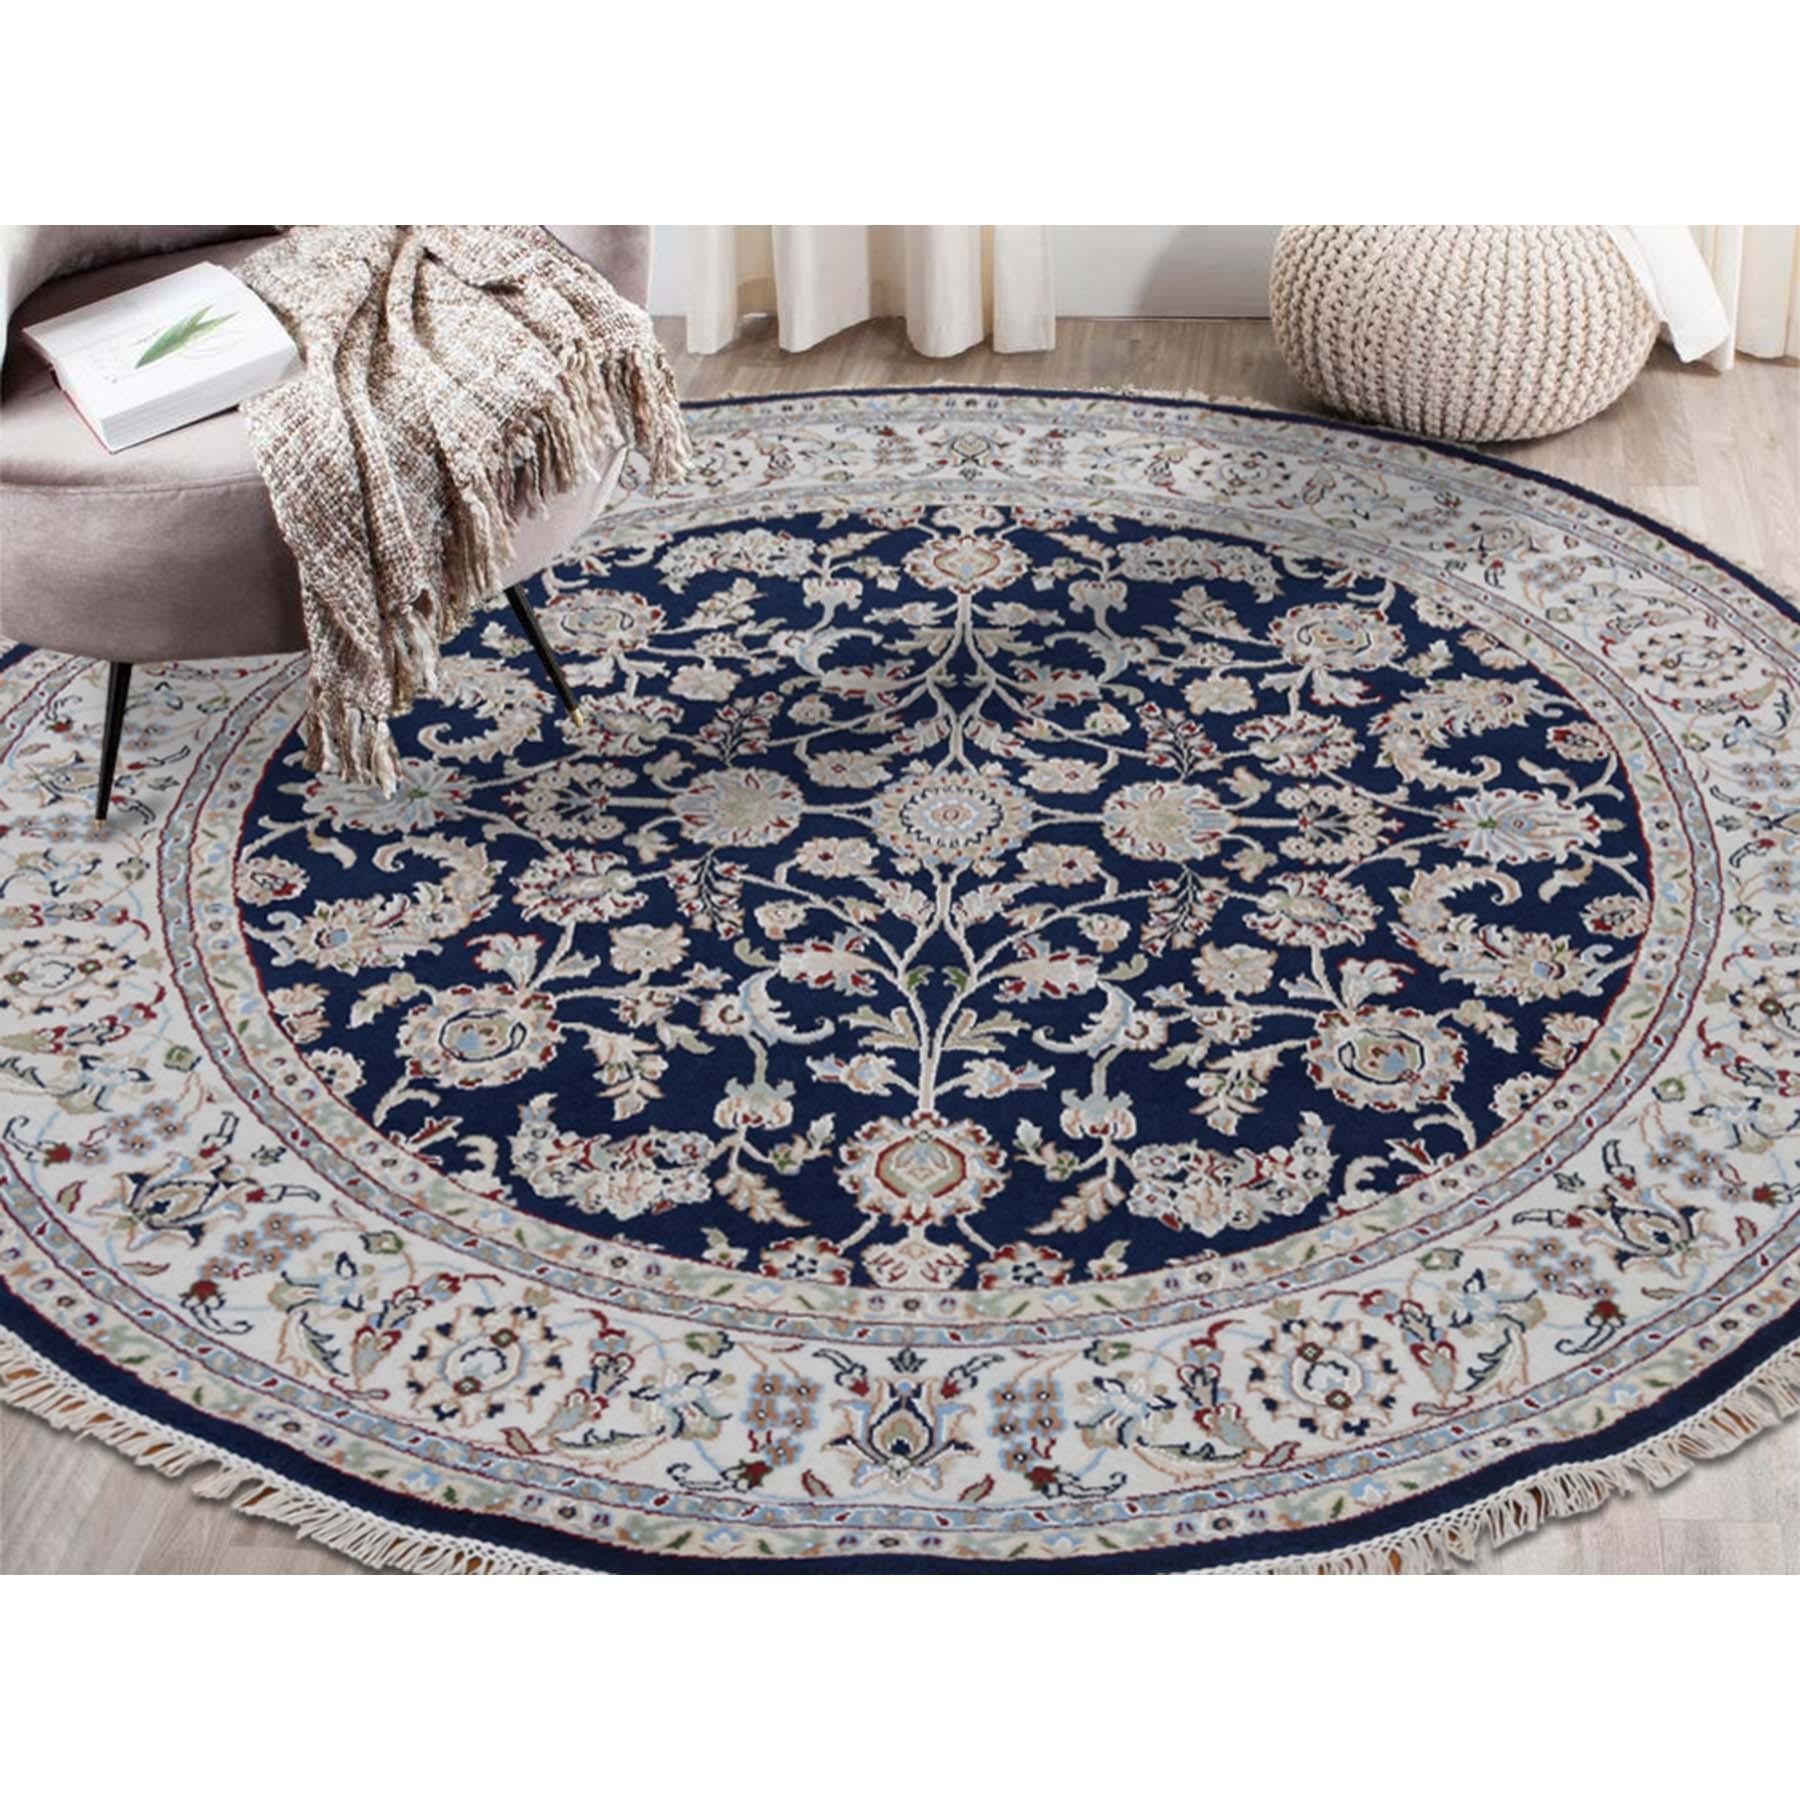 This is a truly genuine one-of-a-kind wool and silk 250 KPSI navy Nain hand knotted oriental round rug. It has been knotted for months and months in the centuries-old Persian weaving craftsmanship techniques by expert artisans. Measures: 5'10